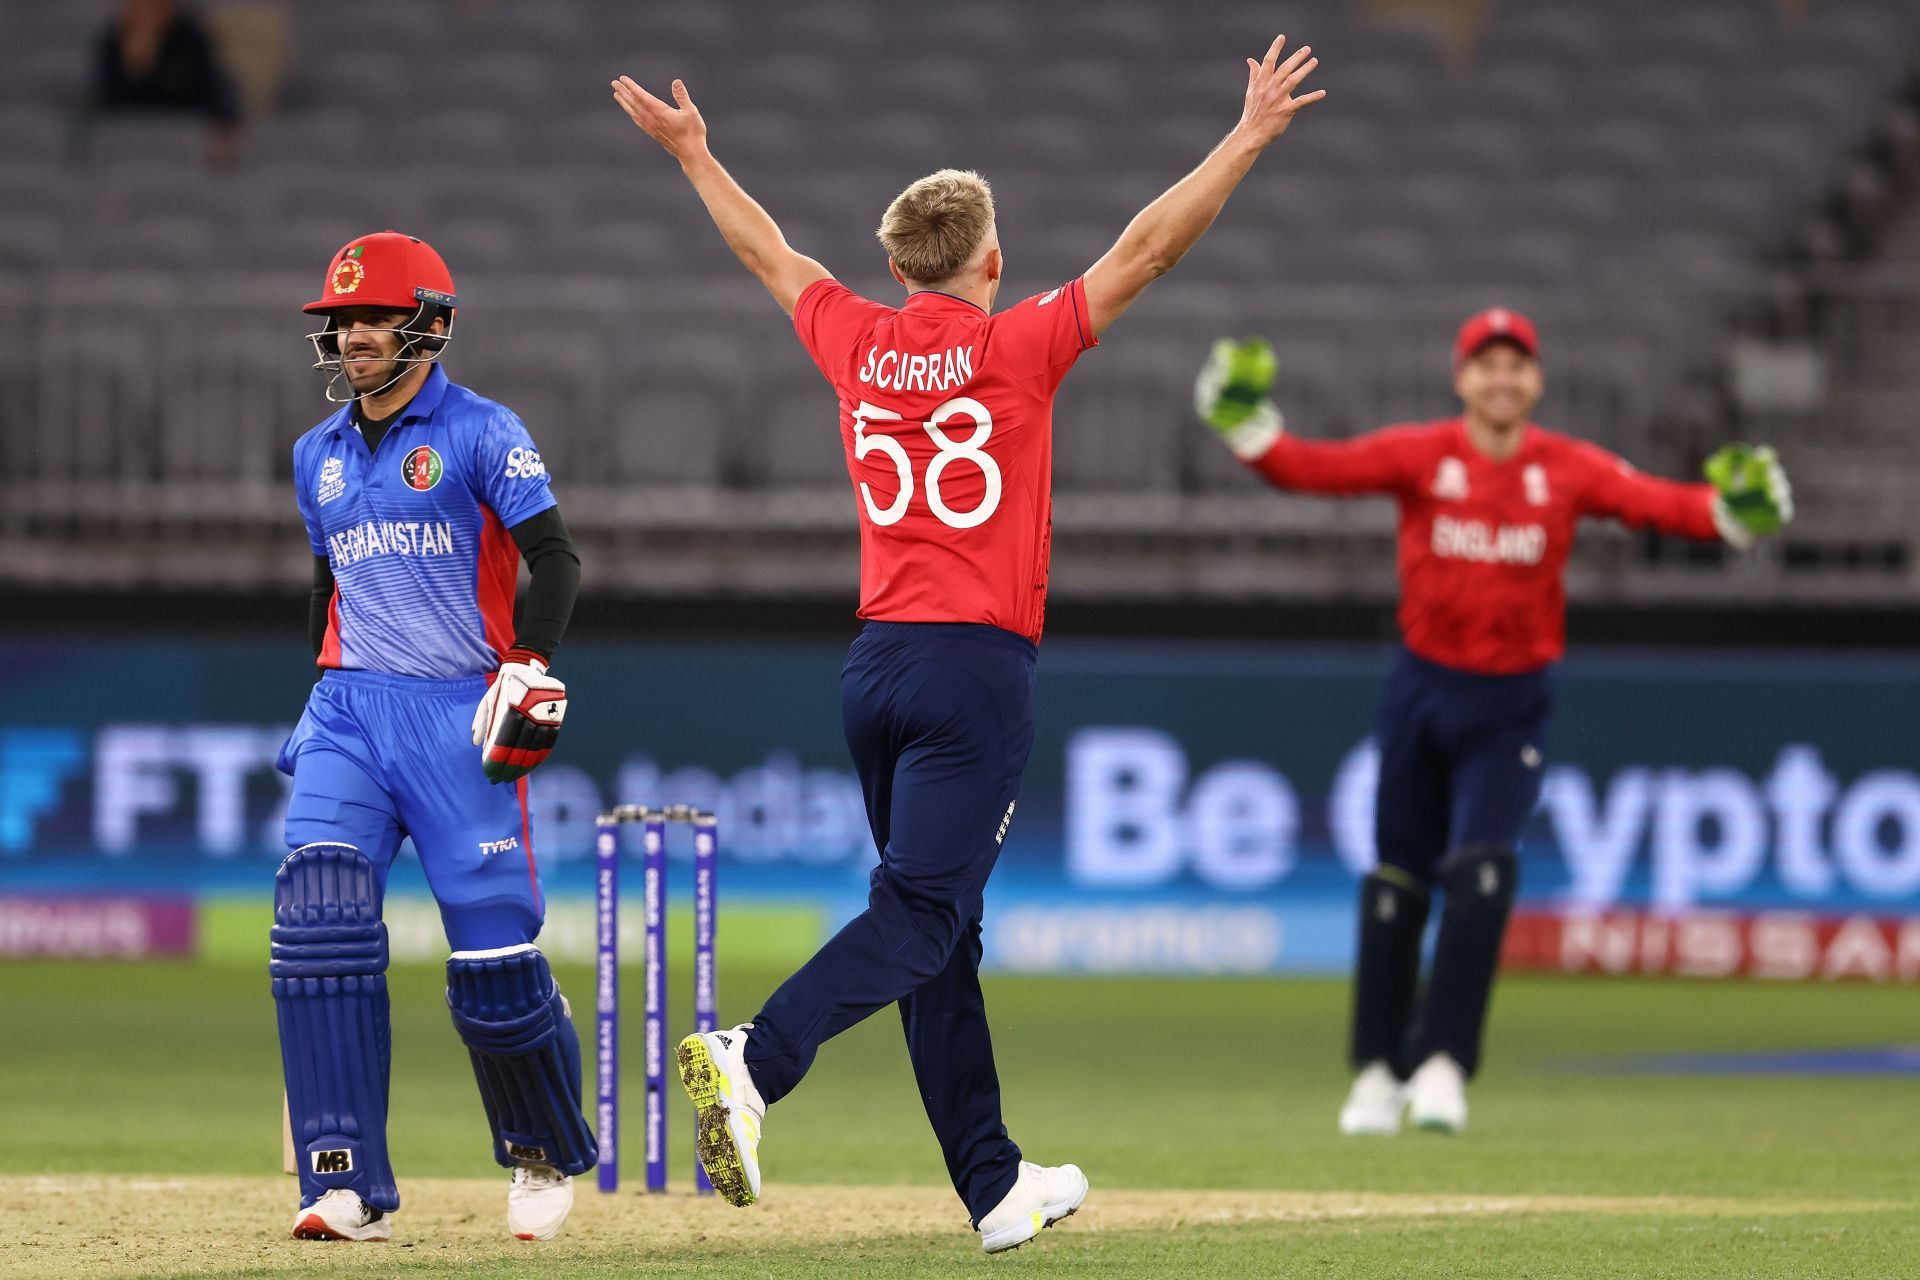 Sam Curran celebrates after completing his five-fer. Pic: Getty Images